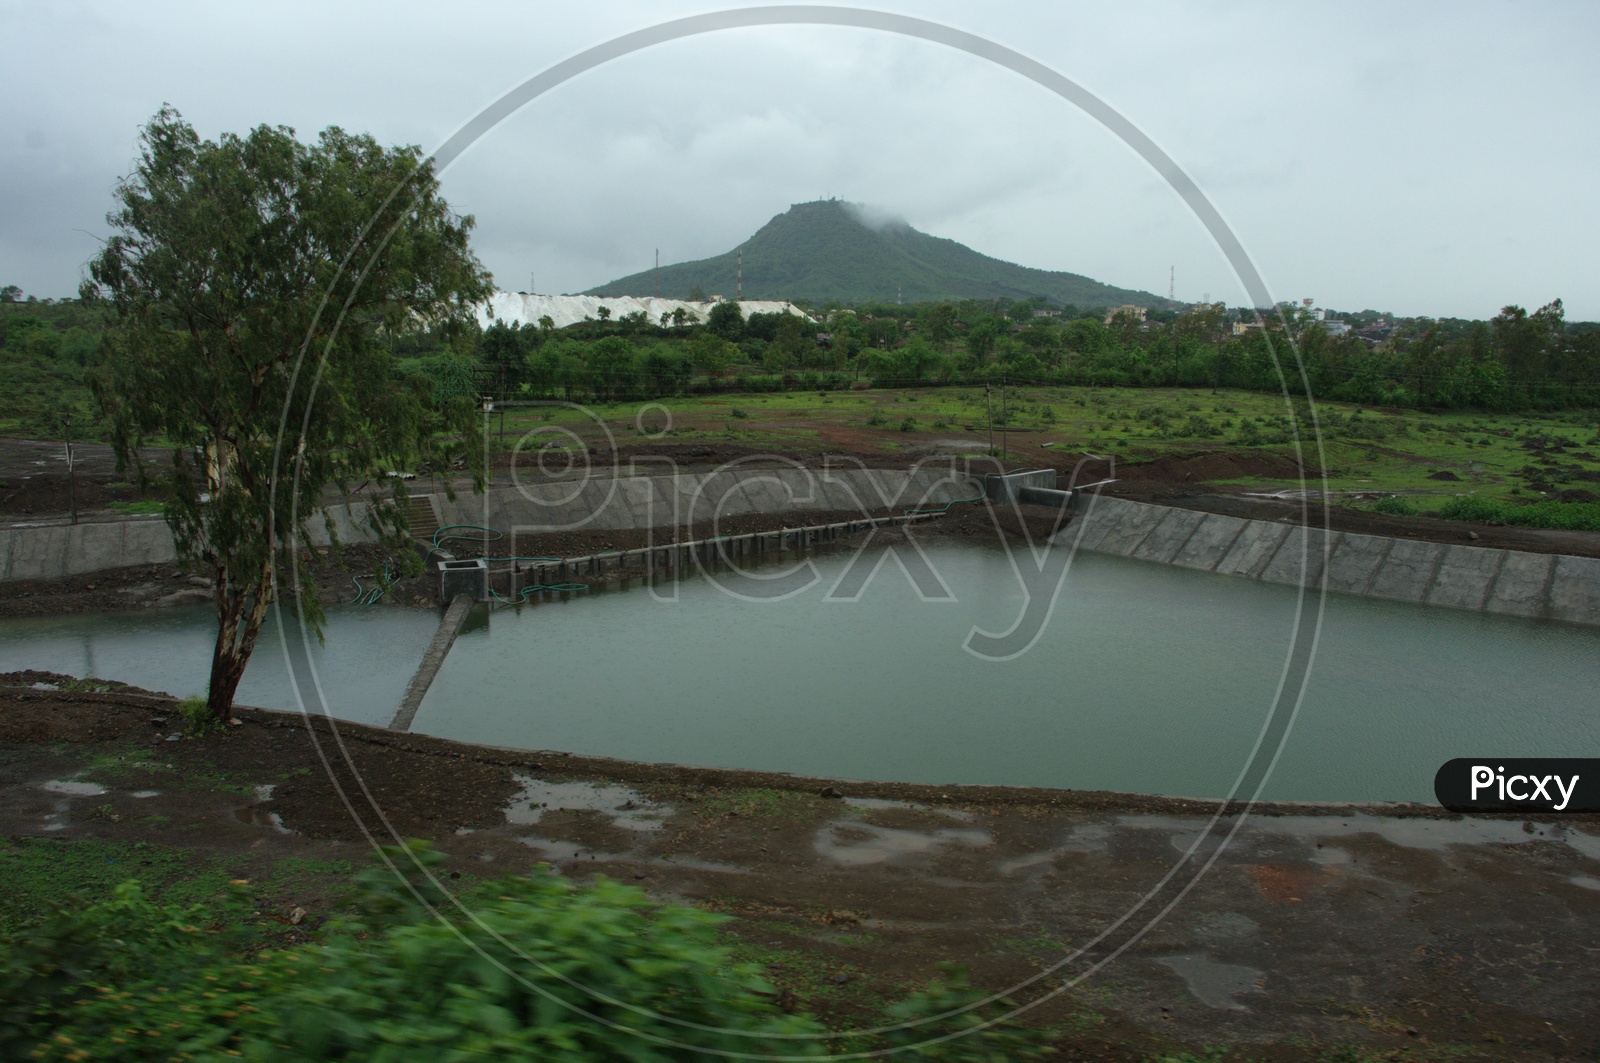 Water Channels On the Outskirts Of a Rural Area